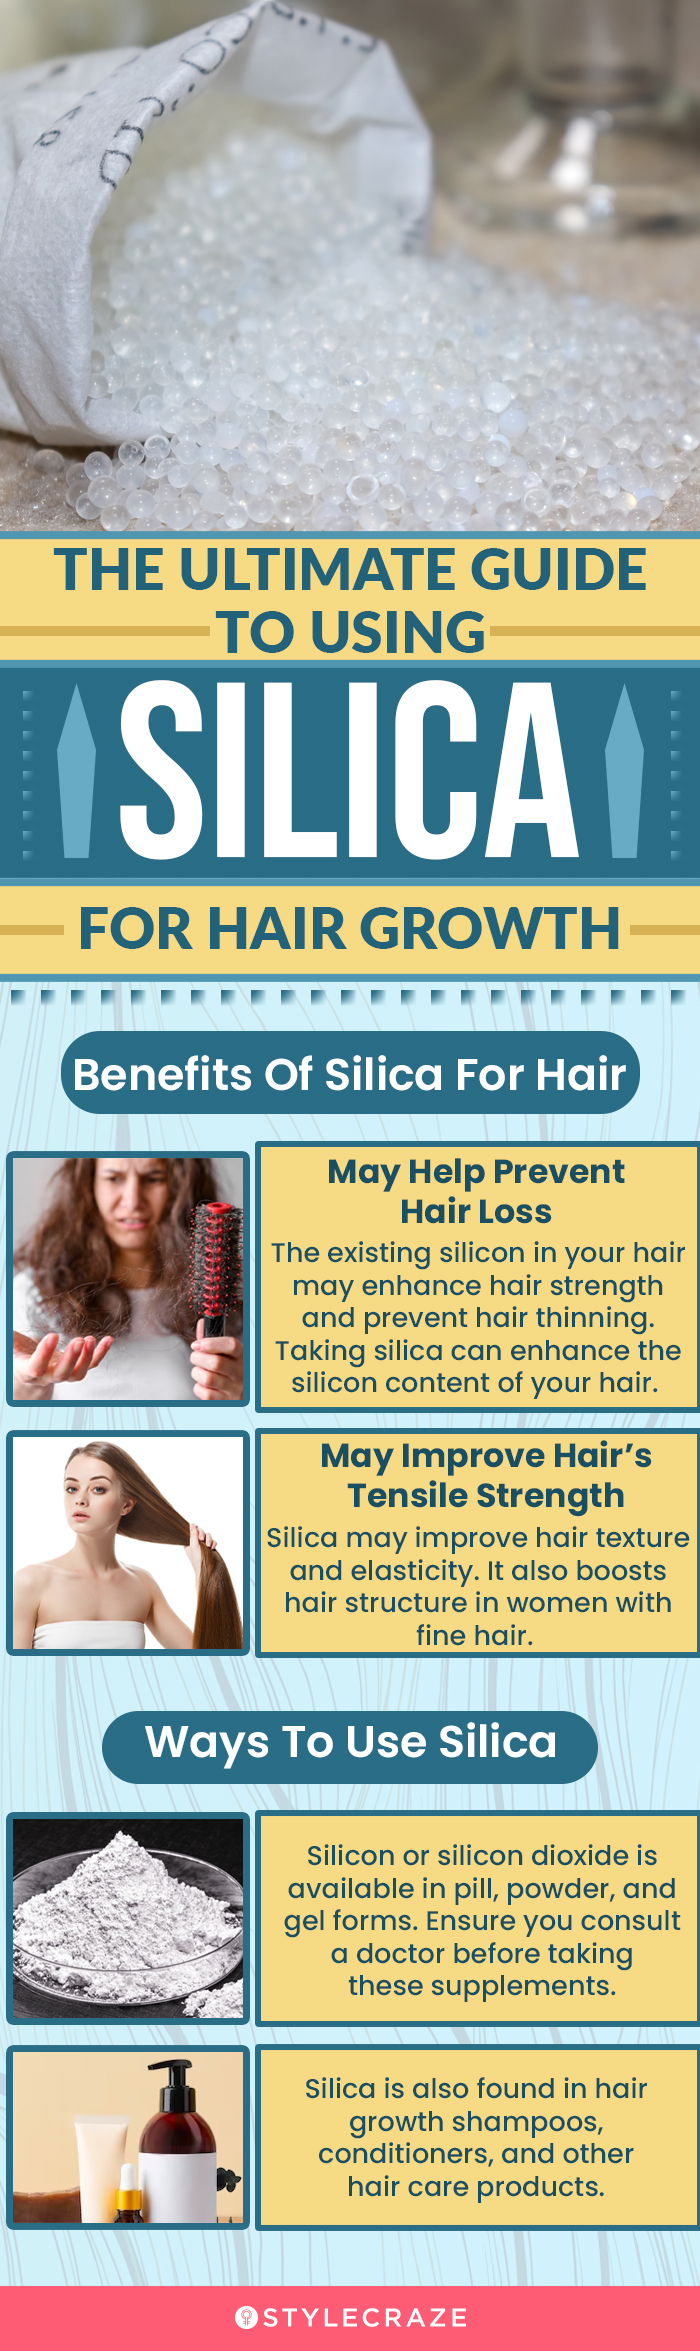 the ultimate guide to silica for hair growth (infographic)